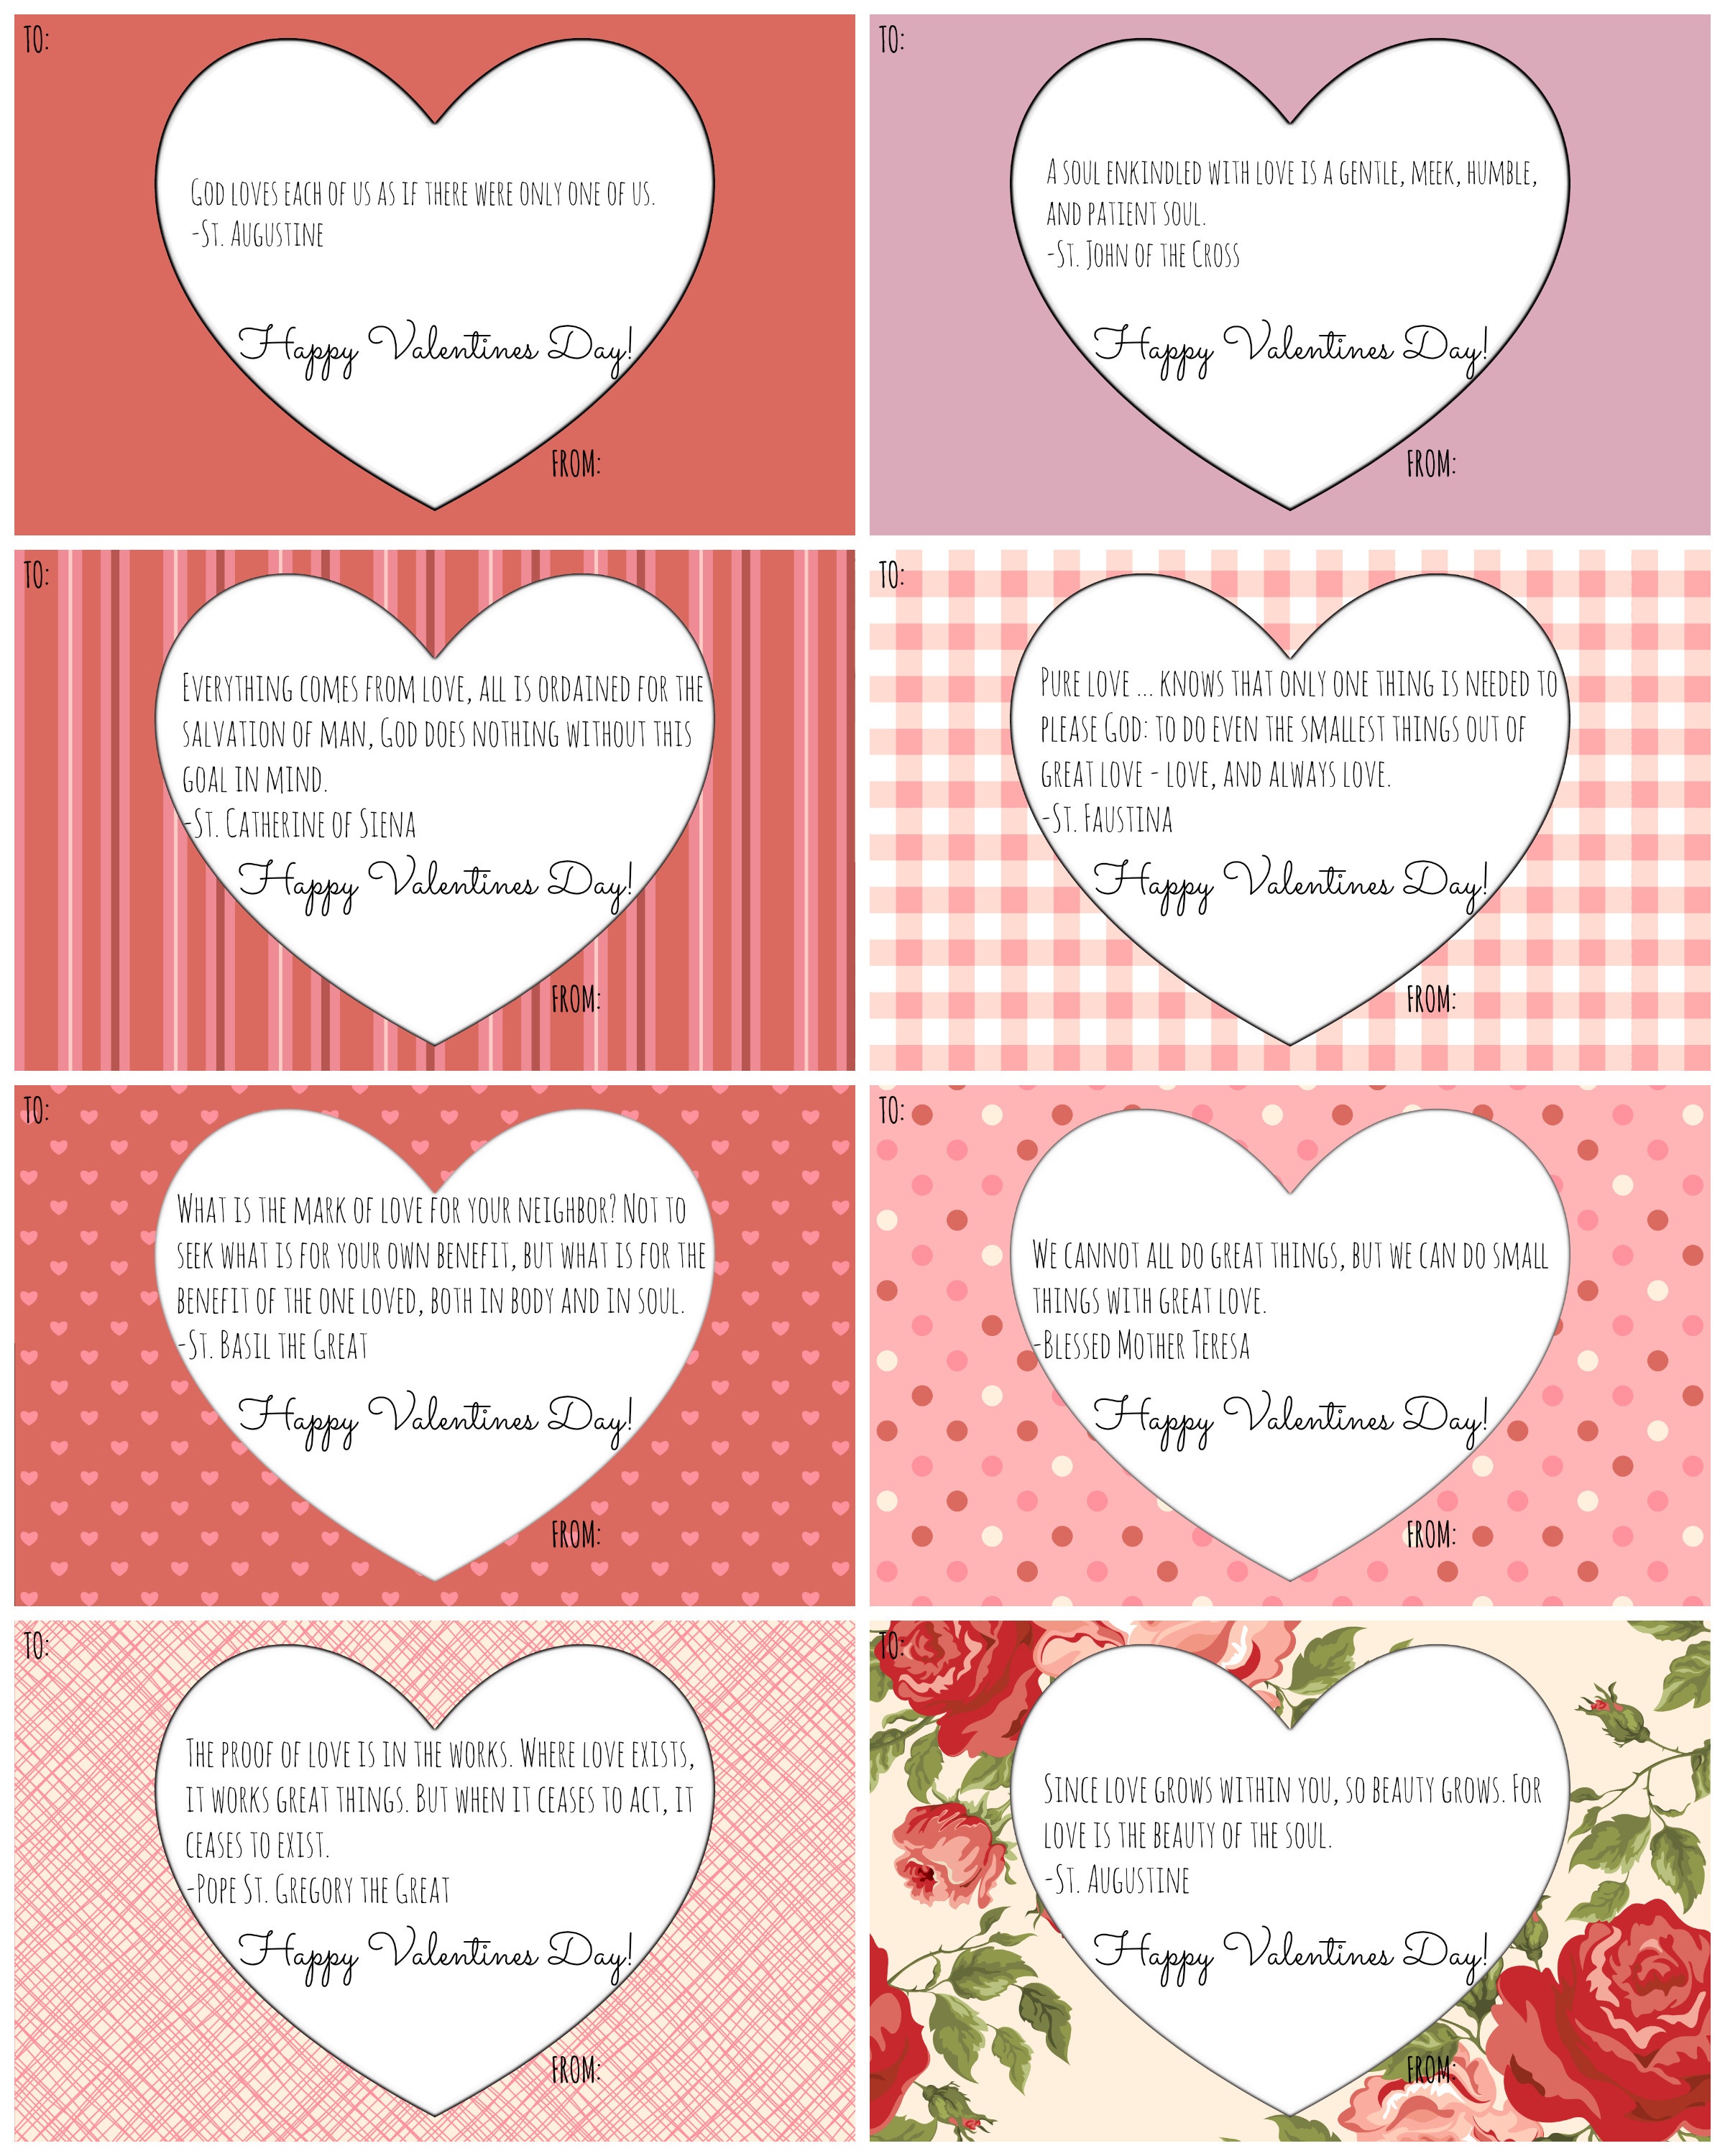 Catholic Valentine Cards: Free Printables! - California To Korea - Free Printable Valentines Day Cards For Her